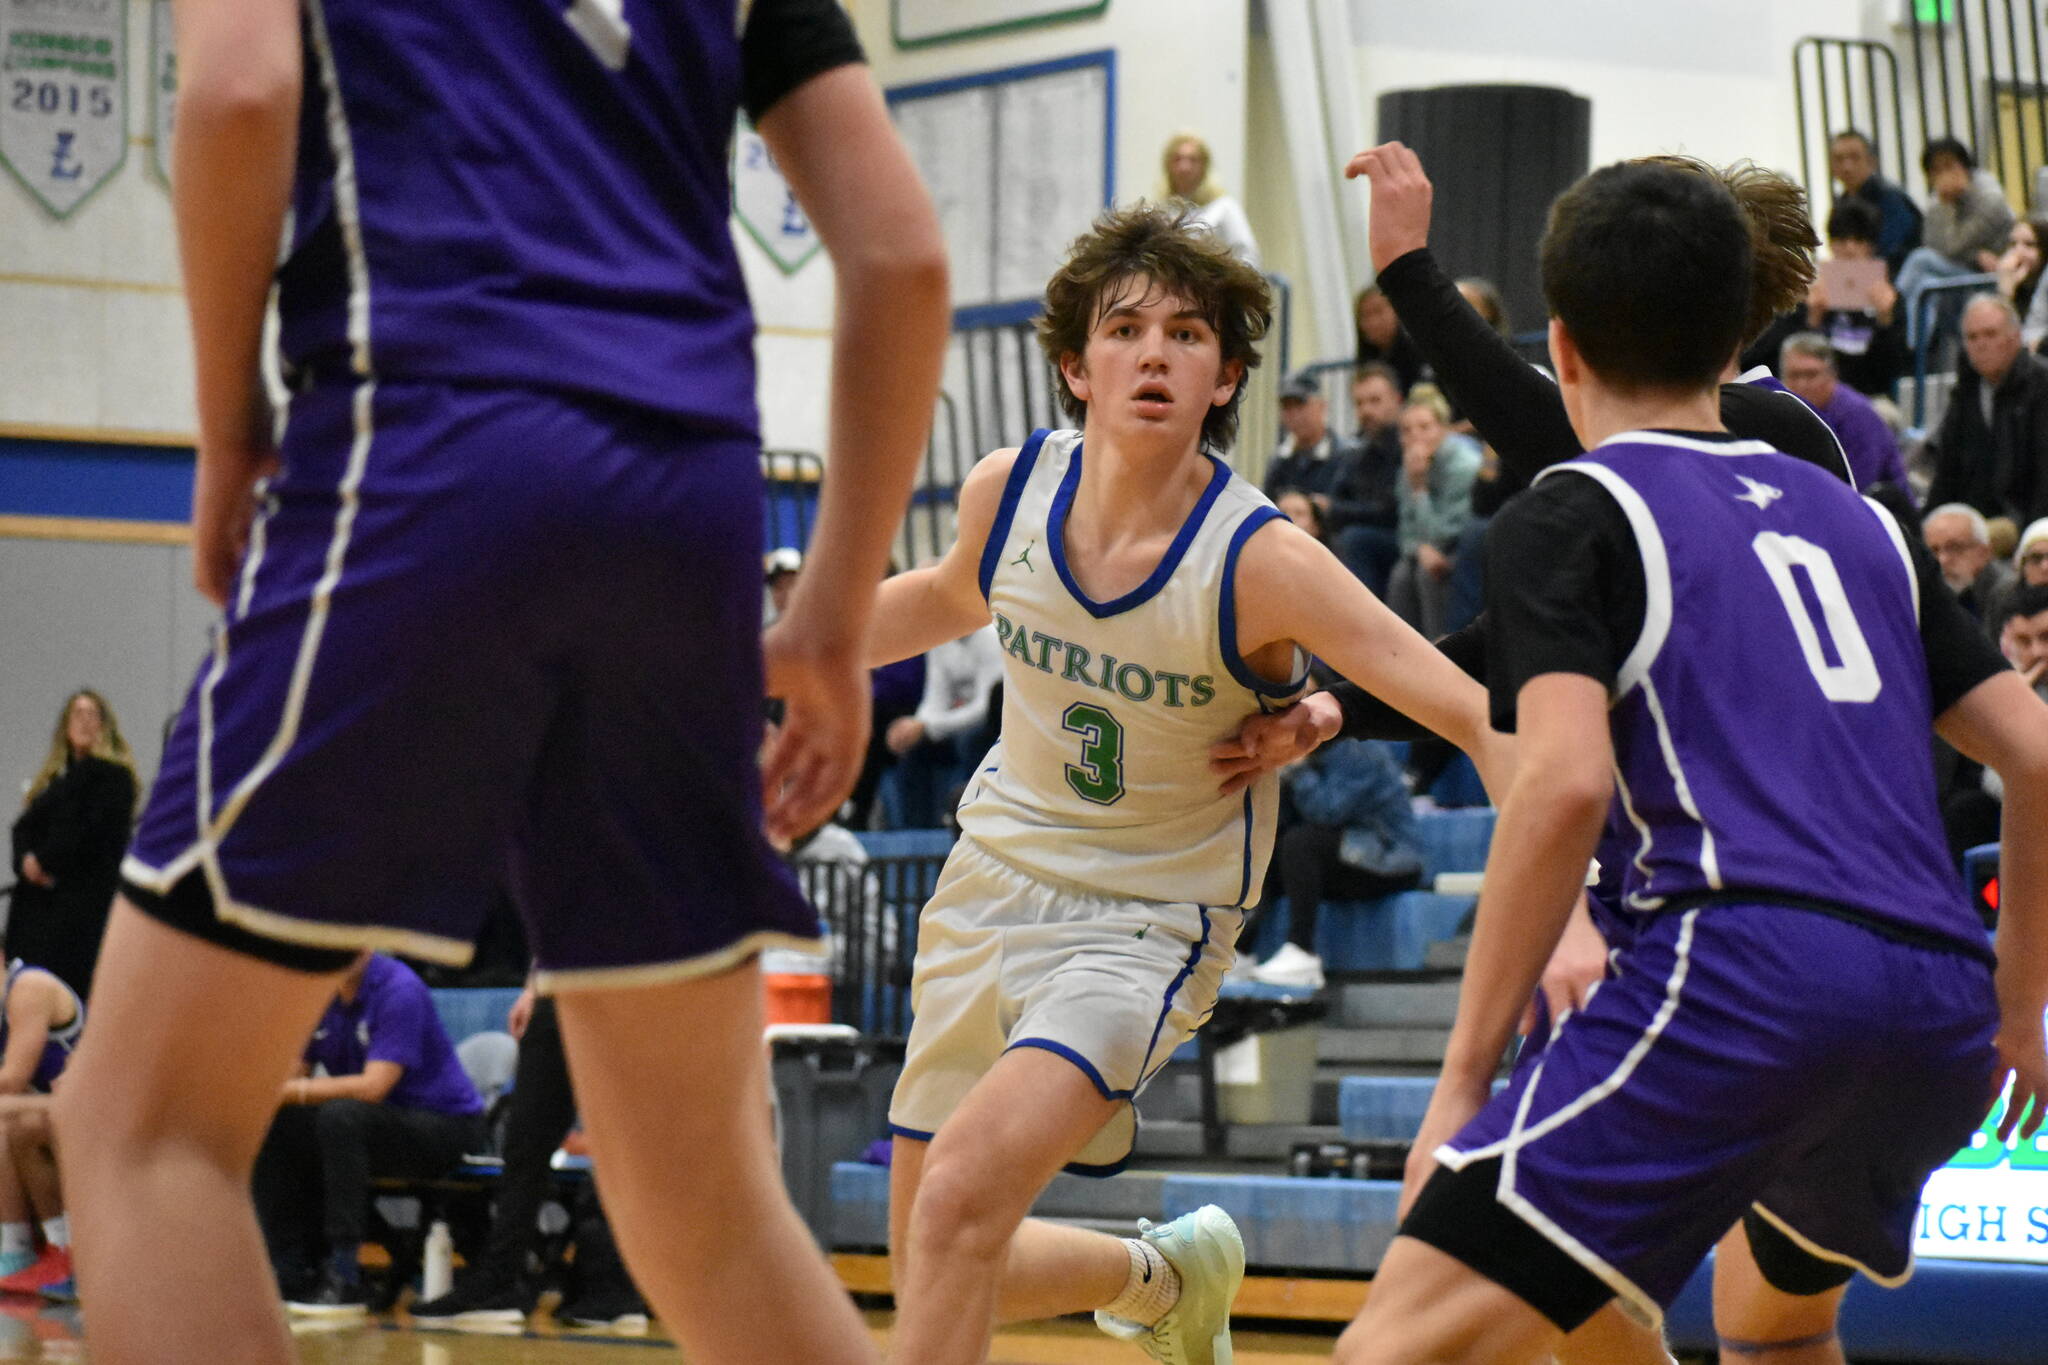 Max Vermeulen looks to drive to the hoop against Lake Washington. Ben Ray / The Reporter